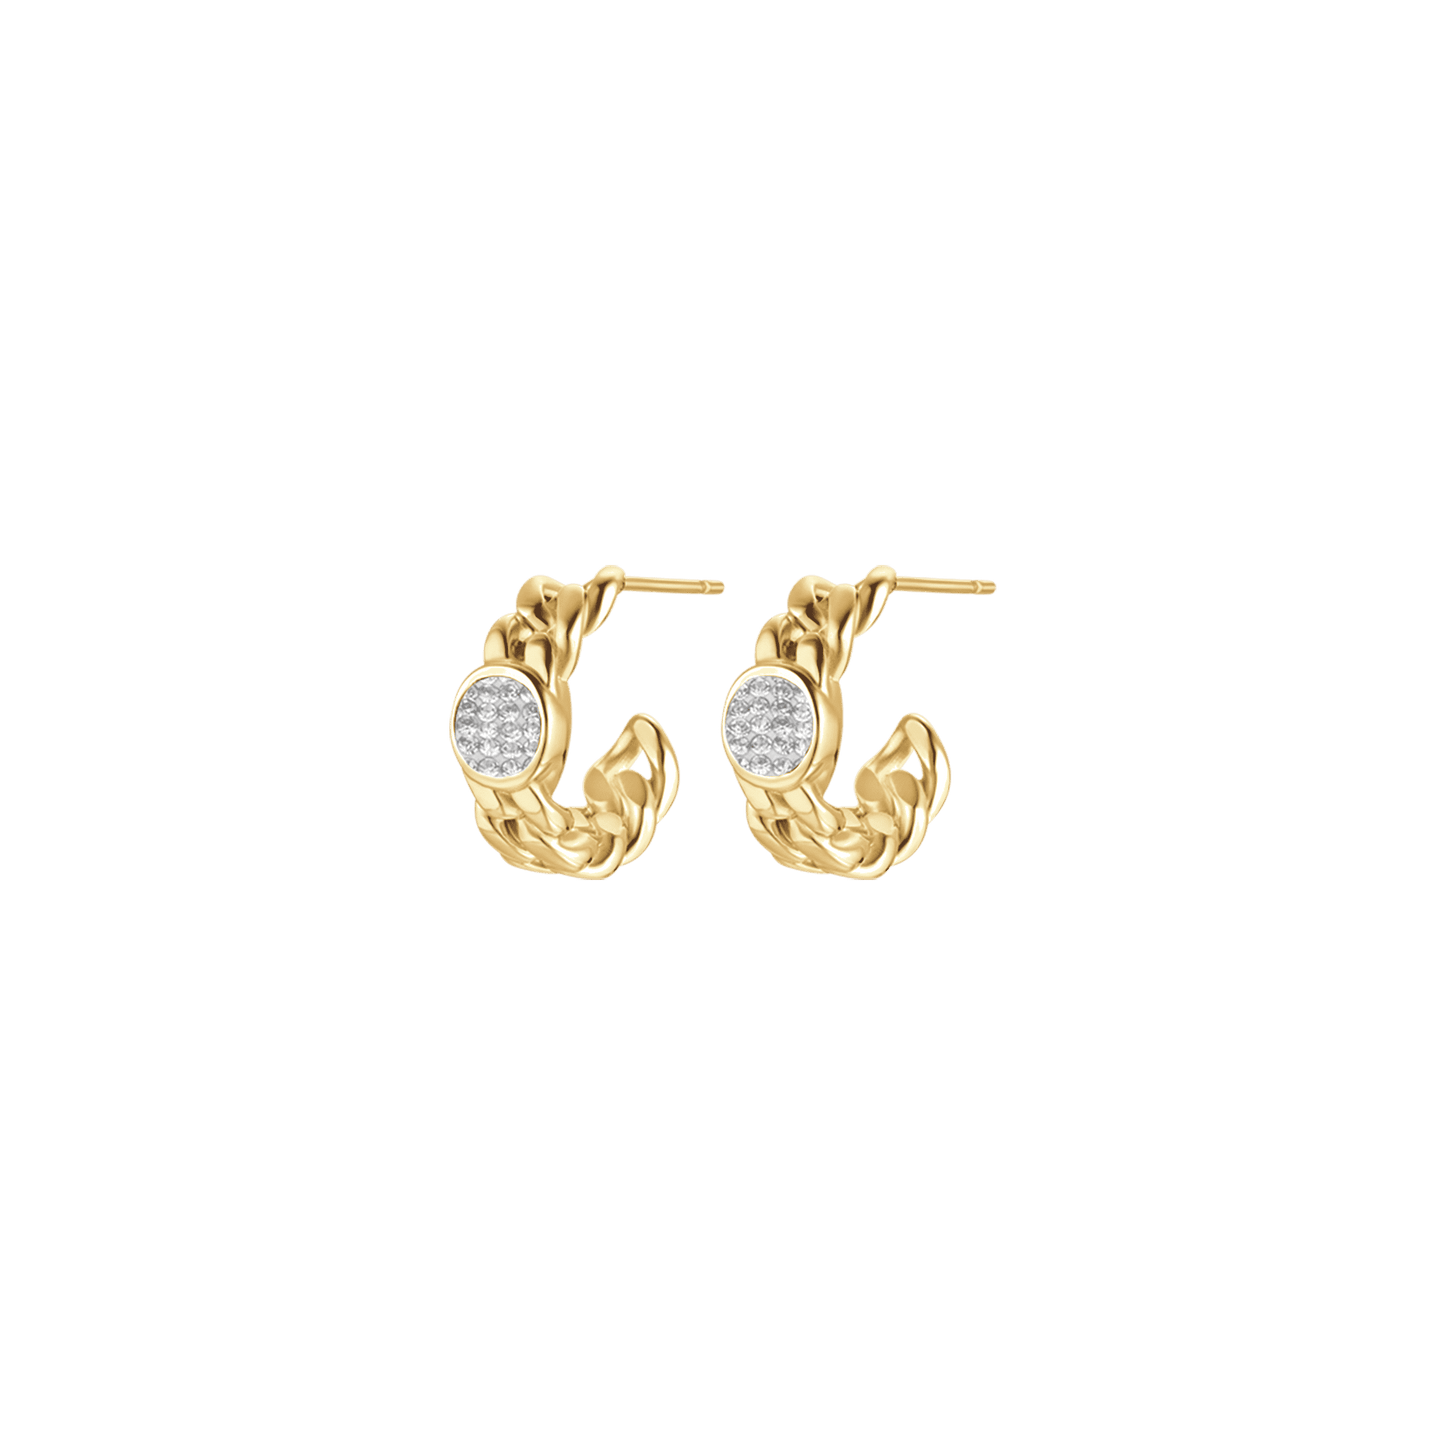 WOMAN'S EARRINGS IN IP GOLD STEEL AND WHITE CRYSTALS Luca Barra